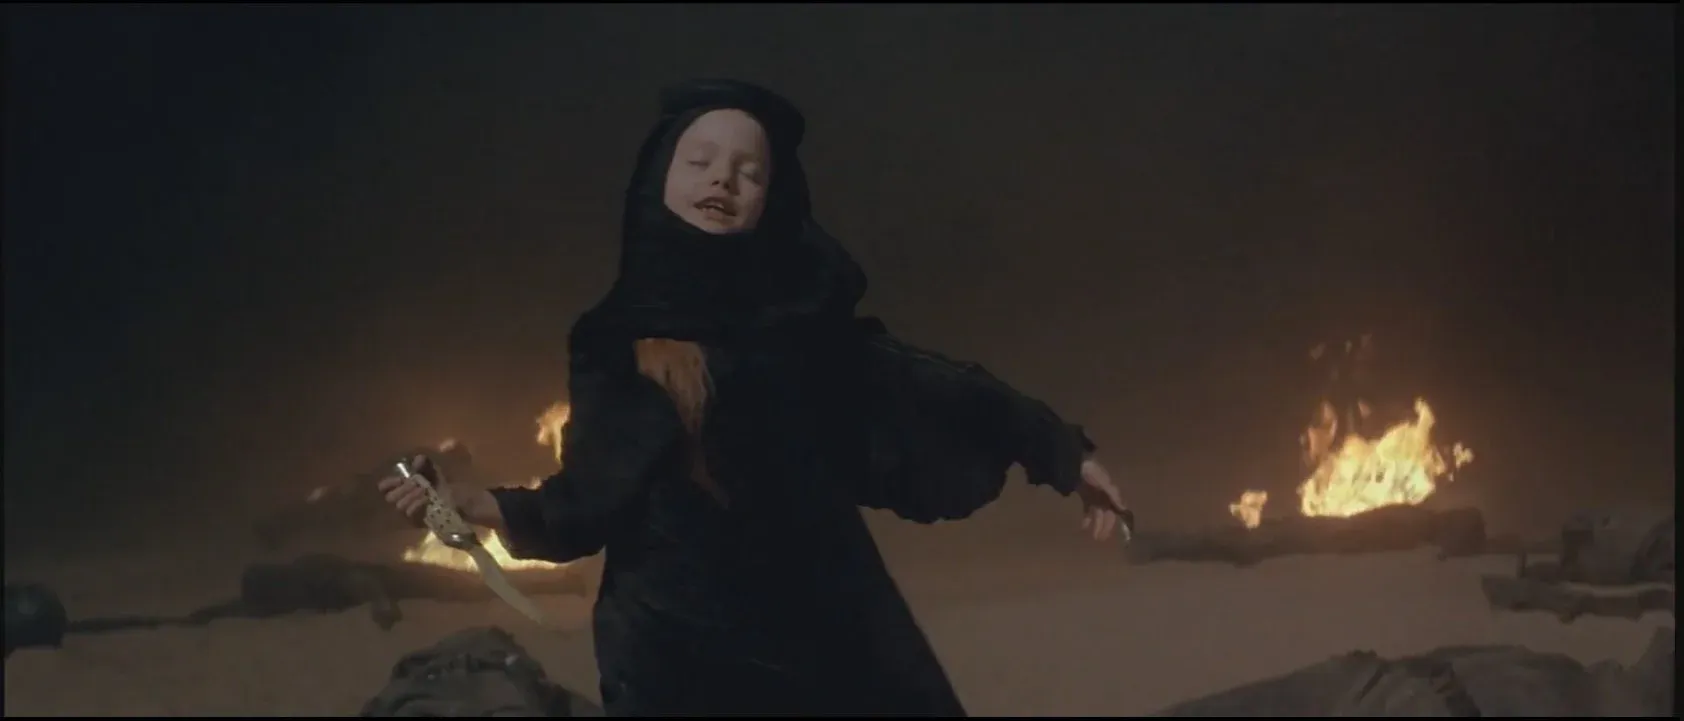 Alia Atreides (Alicia Witt) dances with her dagger, flames visible in the background. She is wearing a black hijab.